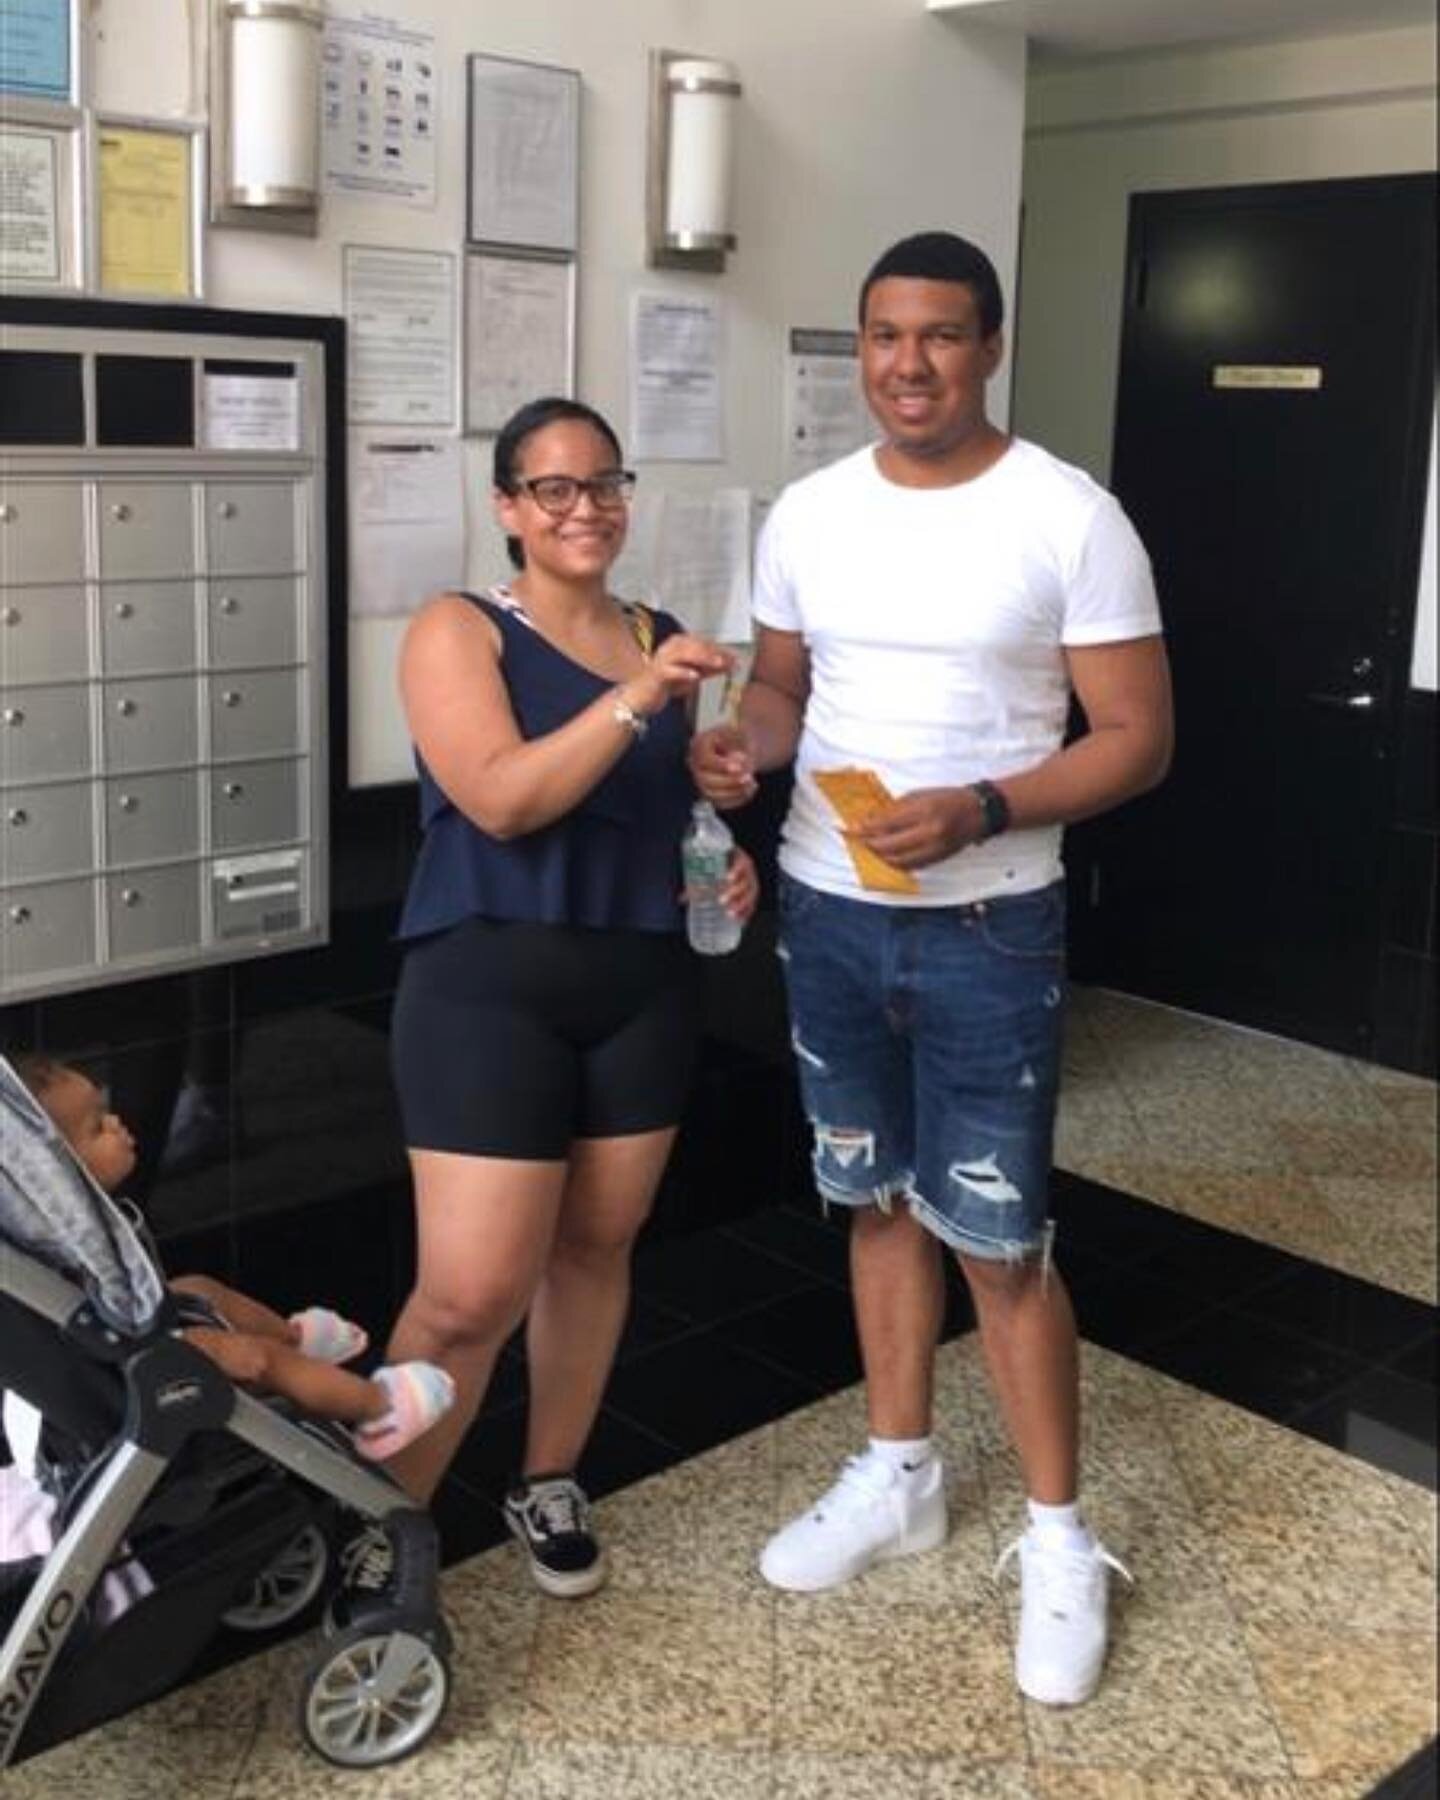 New move in alert! This happy couple picked up their keys today and we are just as excited as they are! 

#bronxprogroup #affordablehousing 
#development #homesweethome #morrisheights #bronx #bx #newyork #nyc